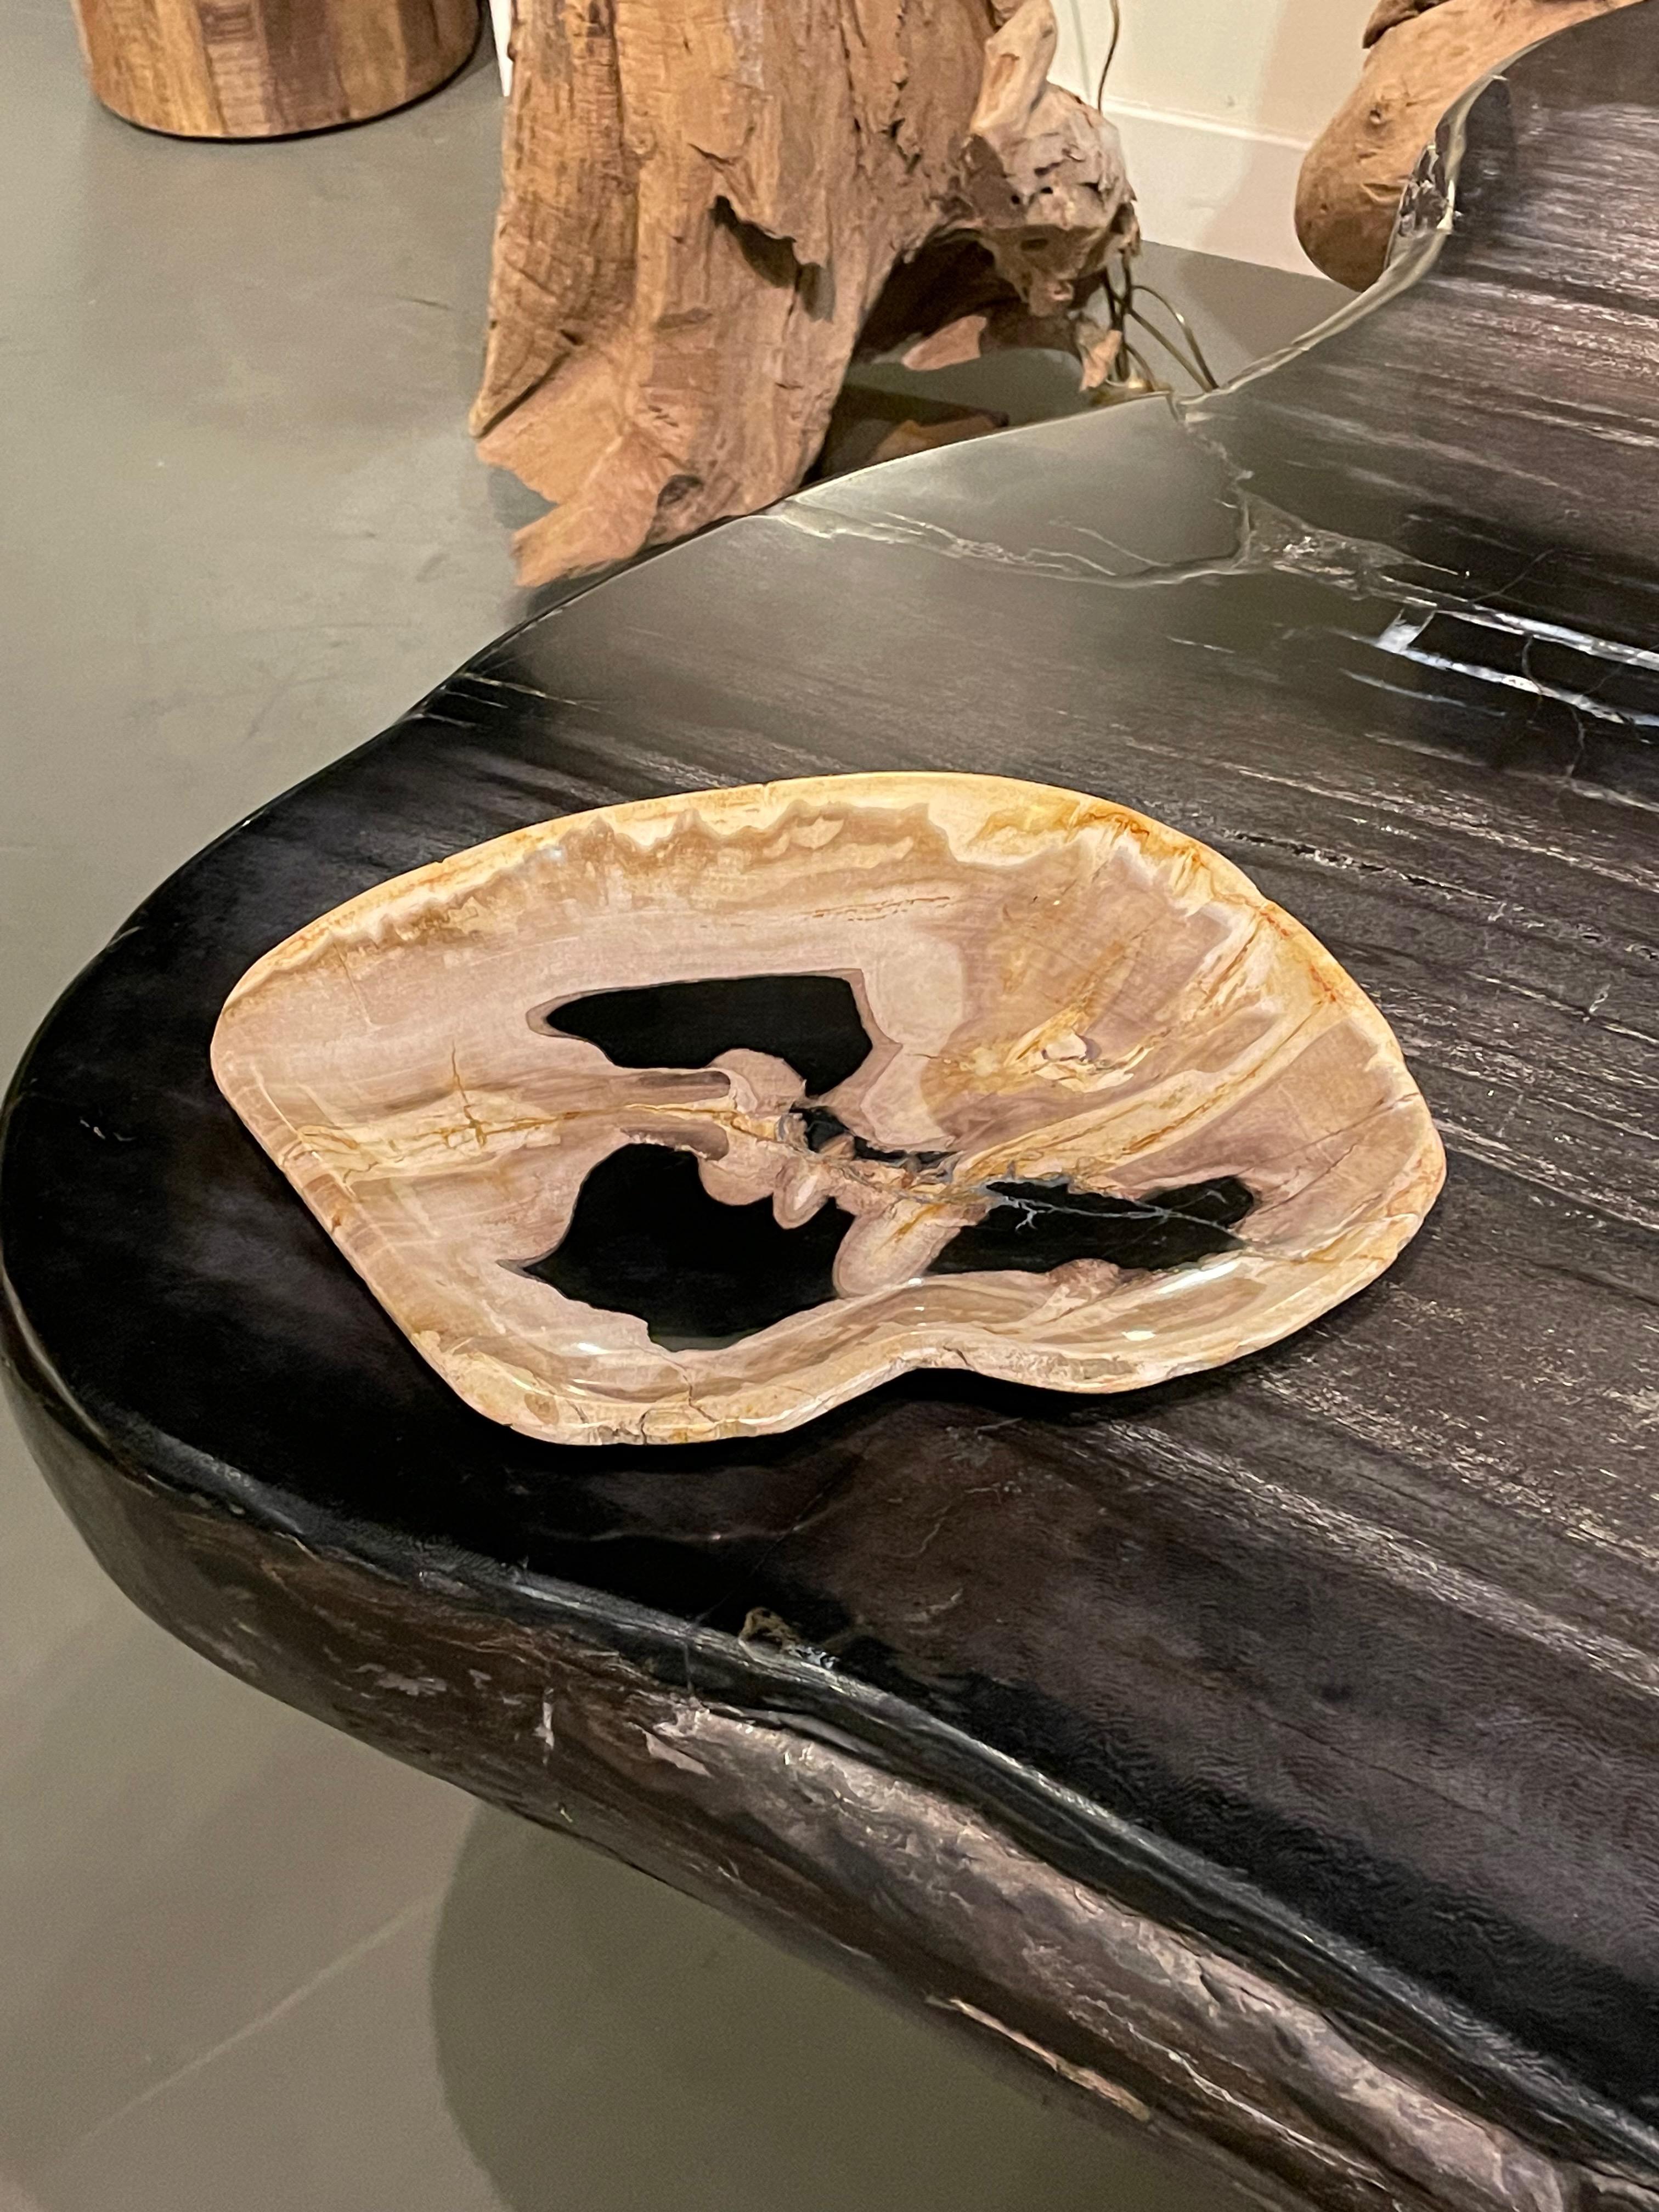 Prehistoric Indonesian polished petrified wood plate.
Black, cream and beige in color.
From a large collection of plates, trays and bowls.